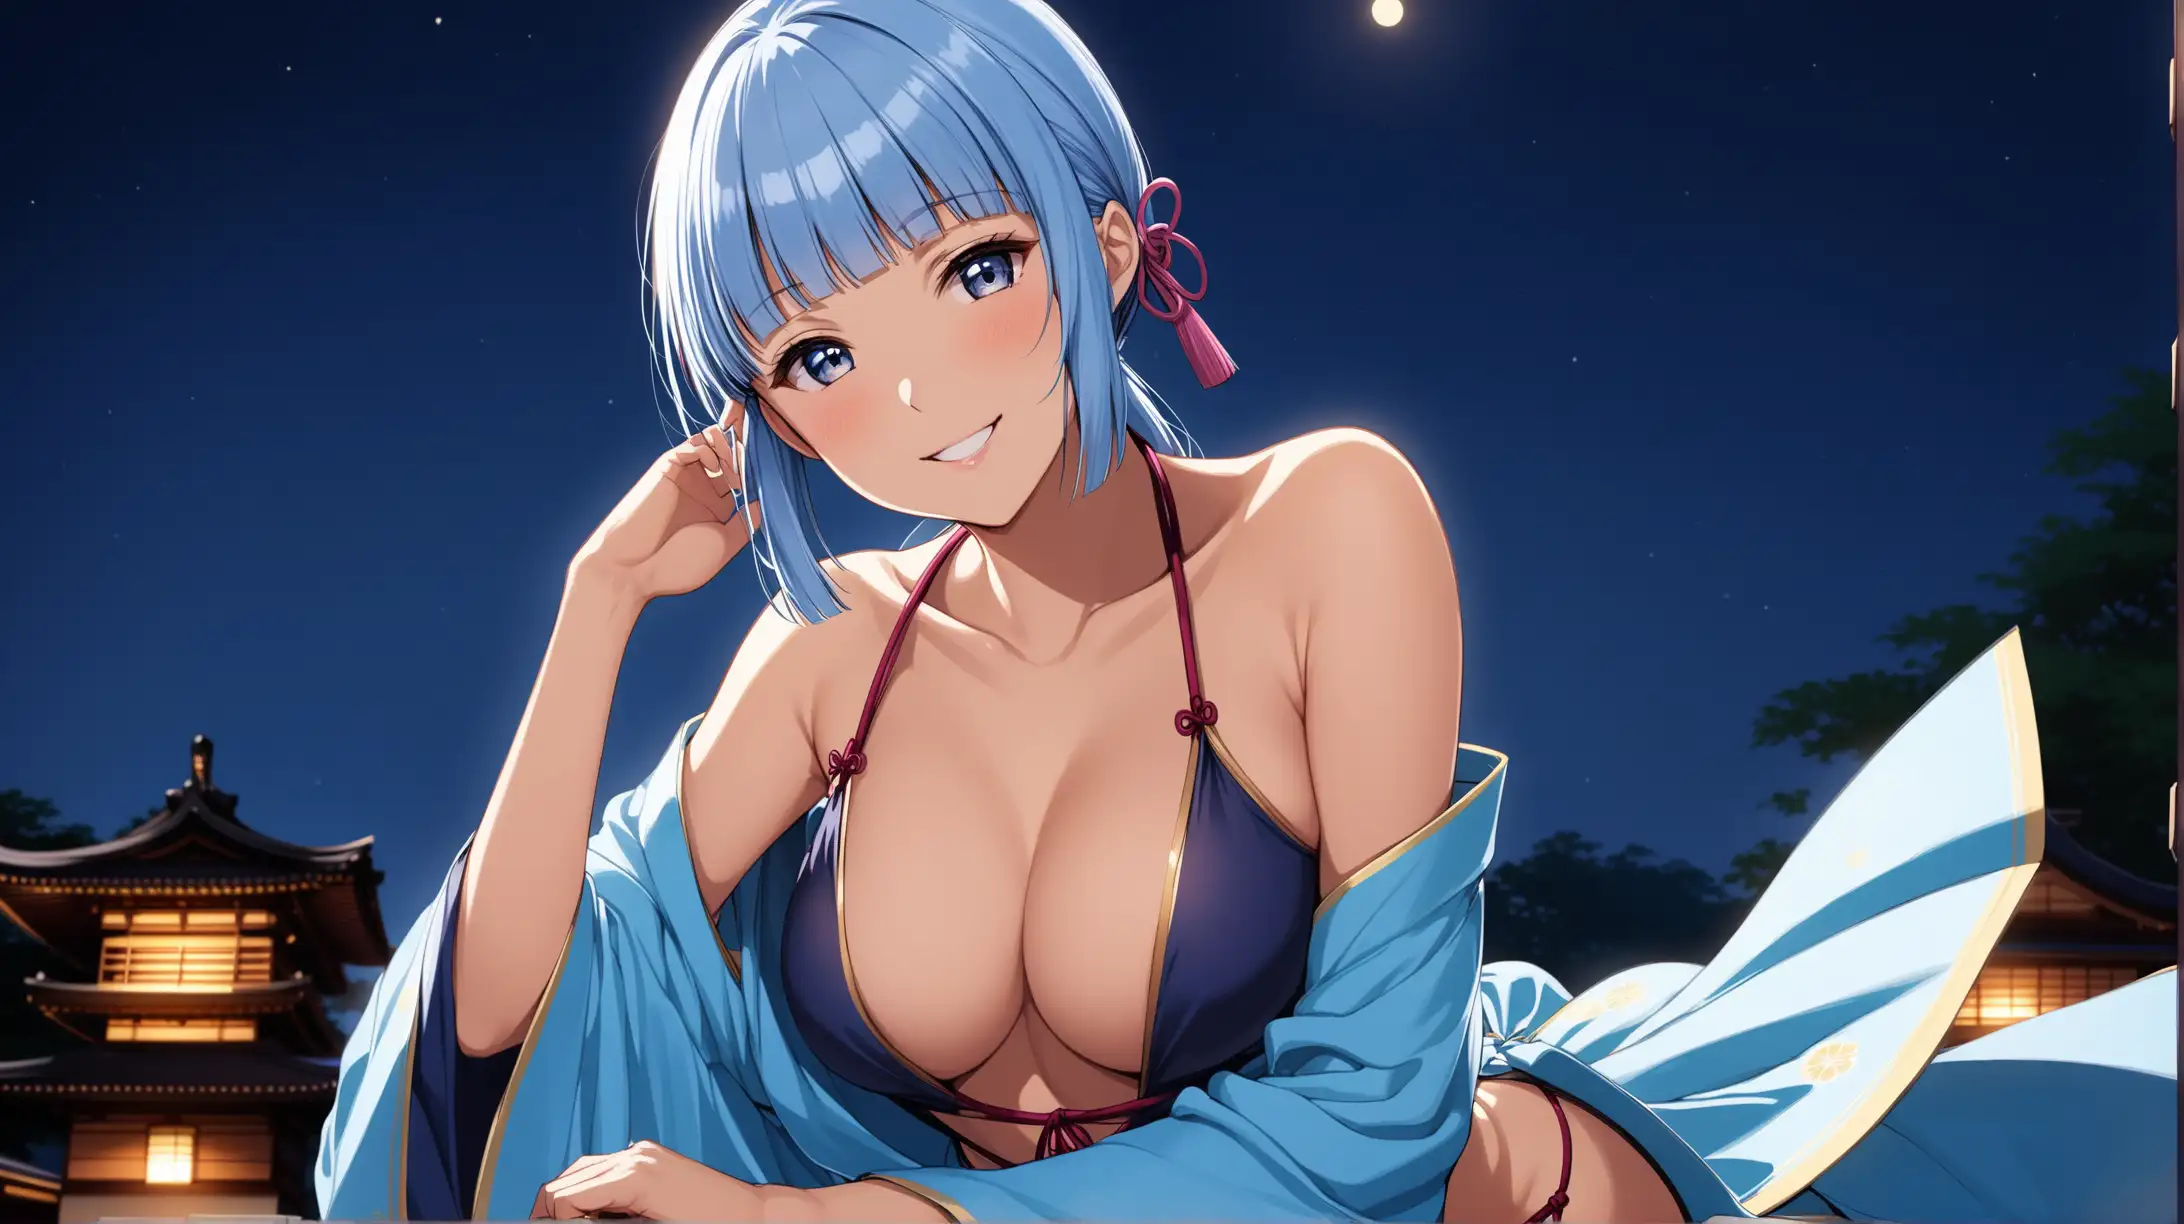 Draw the character Ayaka Kamisato, high quality, dim lighting, low angle, outdoors, seductive pose, revealing outfit, erotic, smiling at the viewer